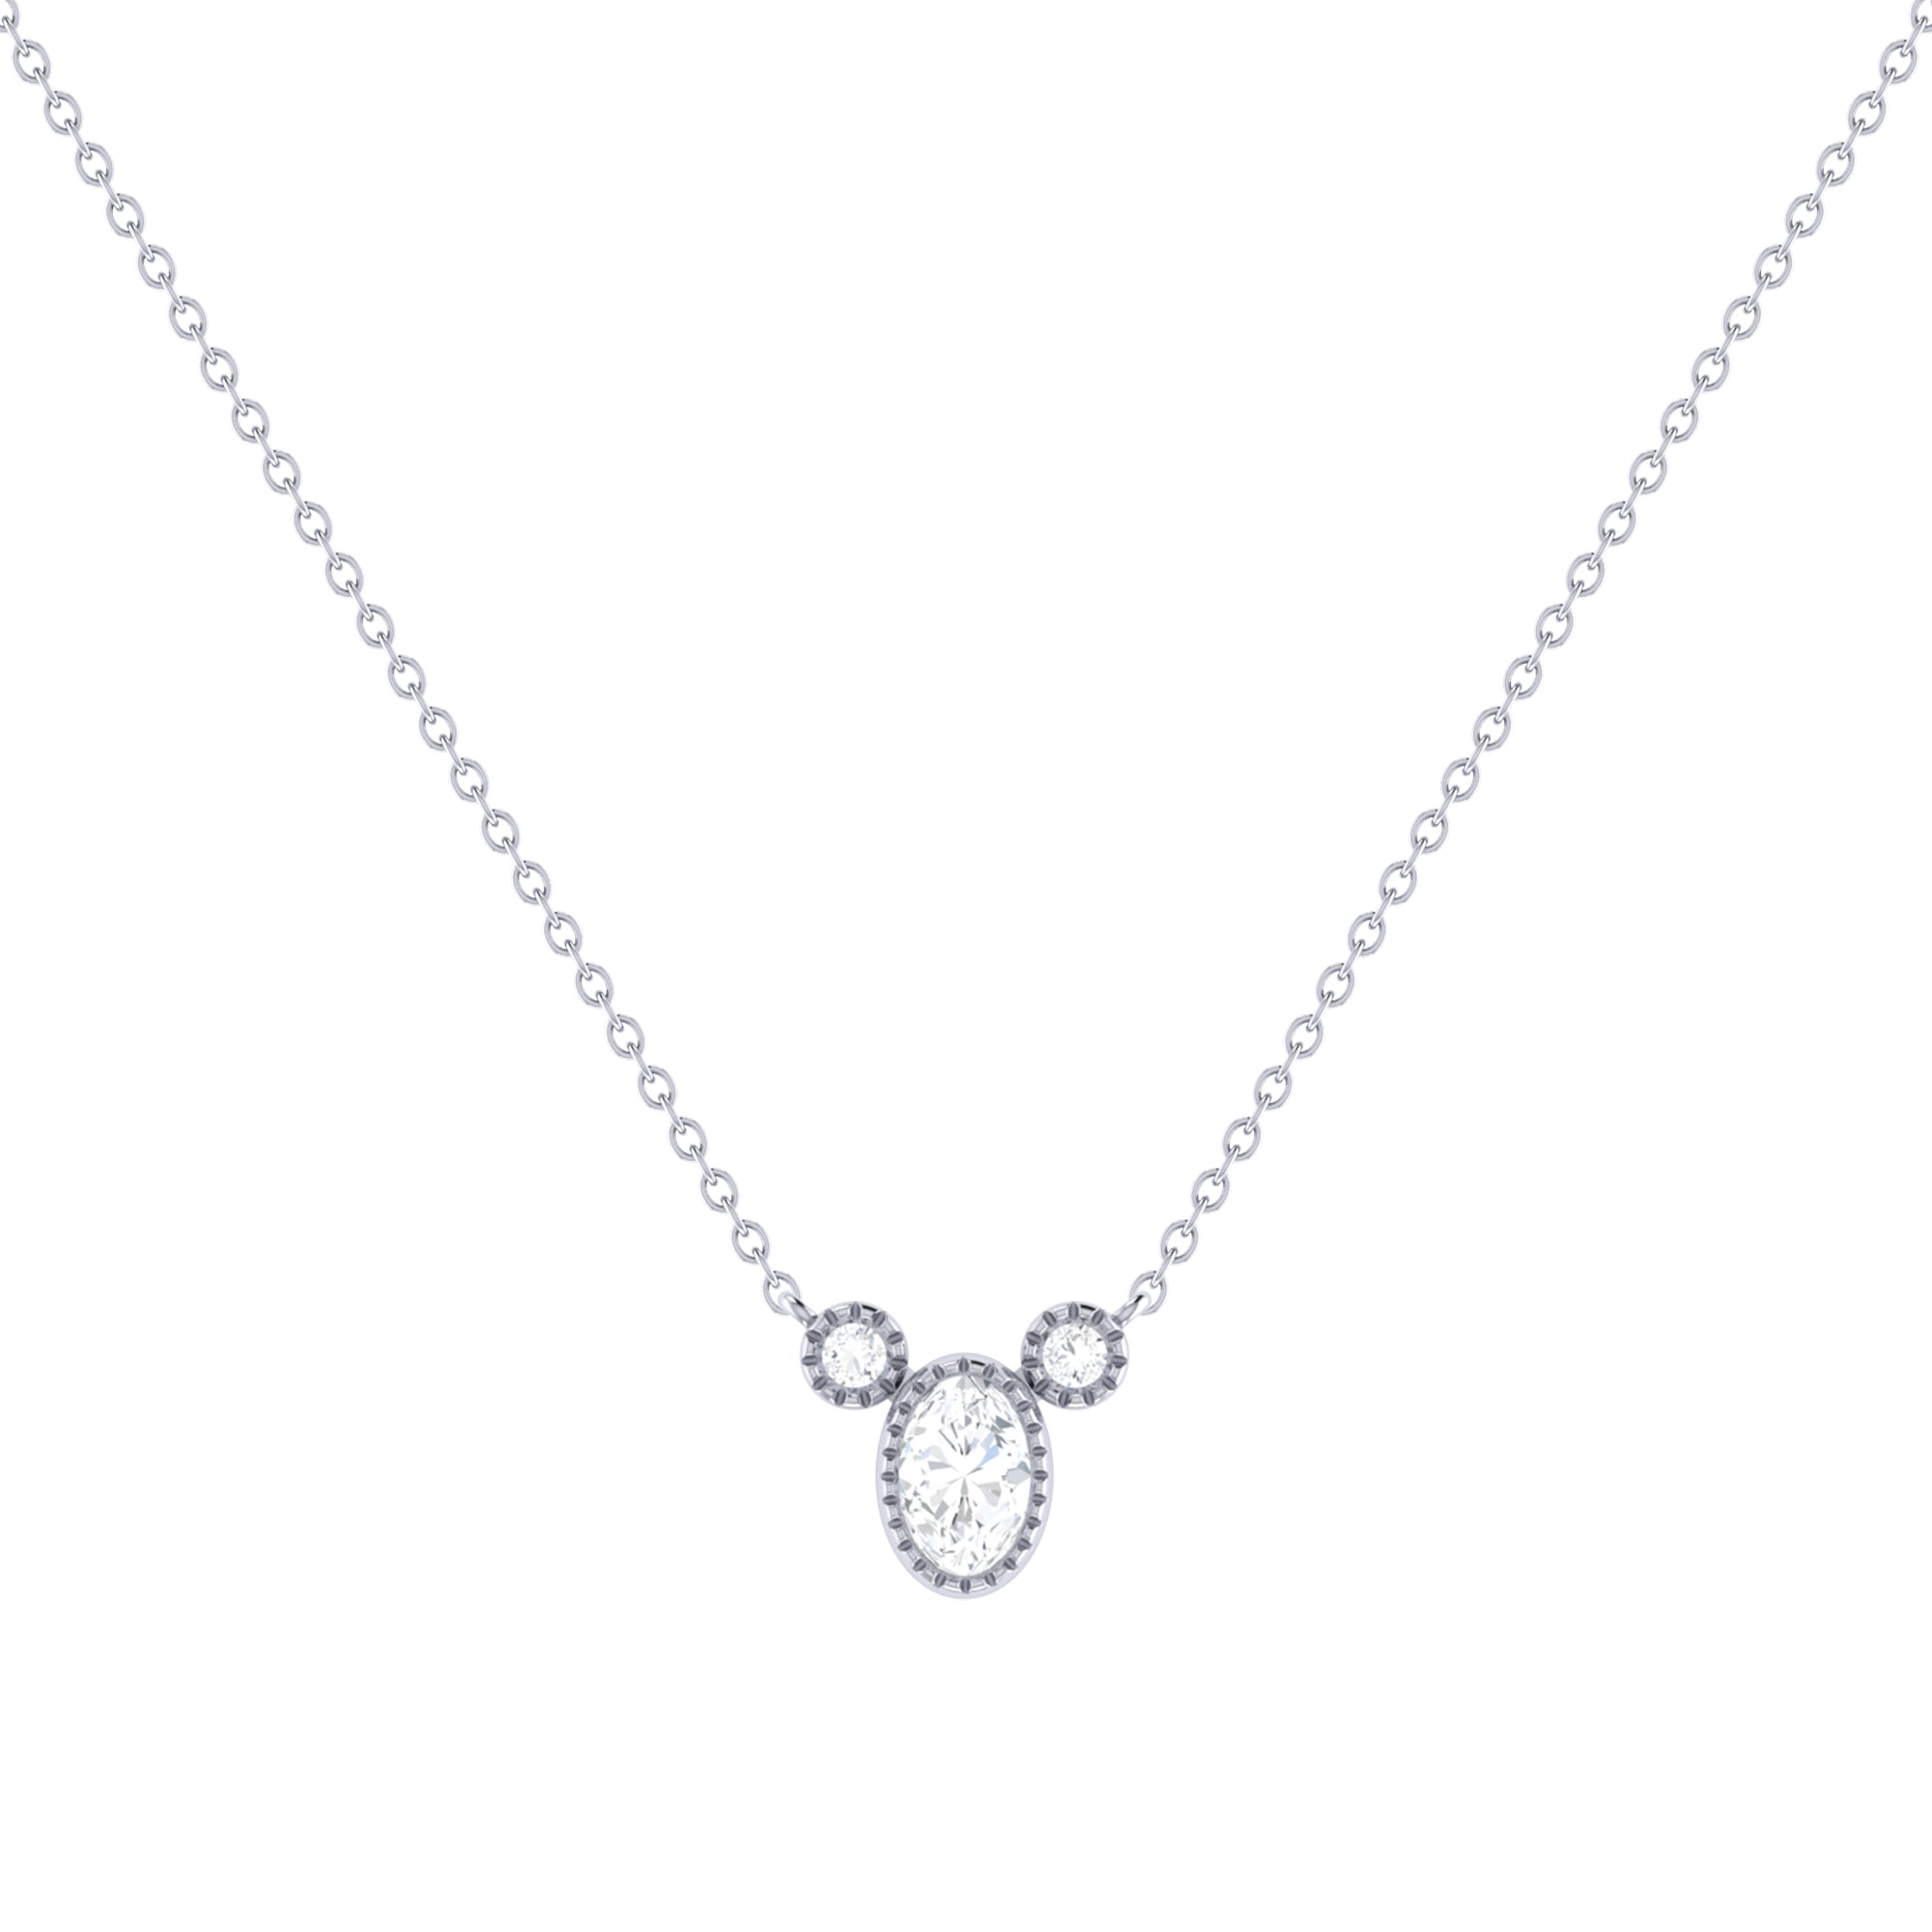 Oval Cut Diamond Birthstone Necklace In 14K White Gold